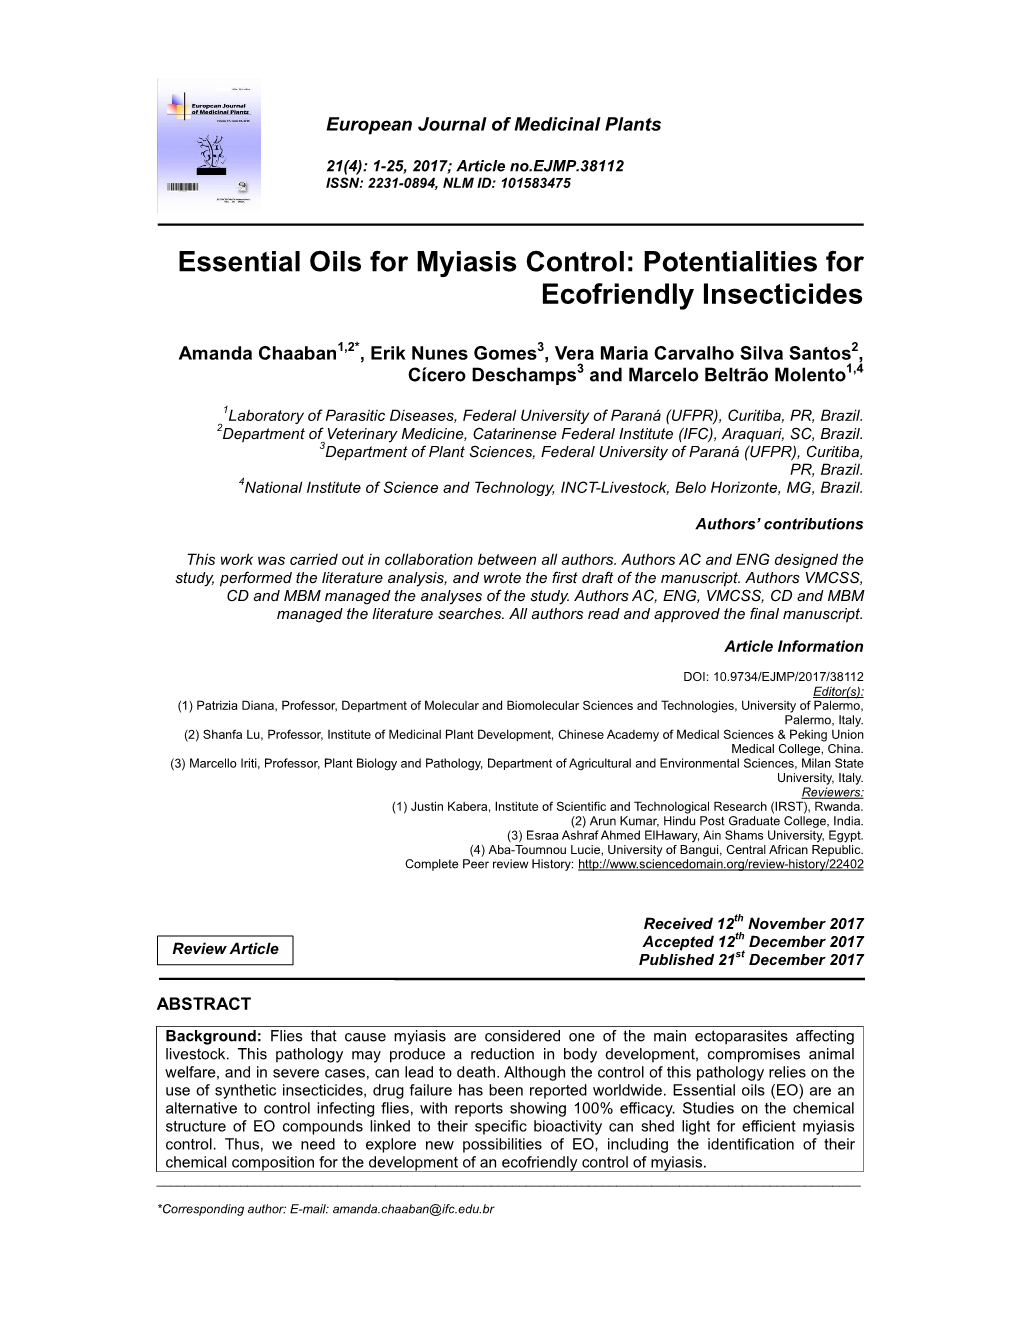 Essential Oils for Myiasis Control: Potentialities for Ecofriendly Insecticides